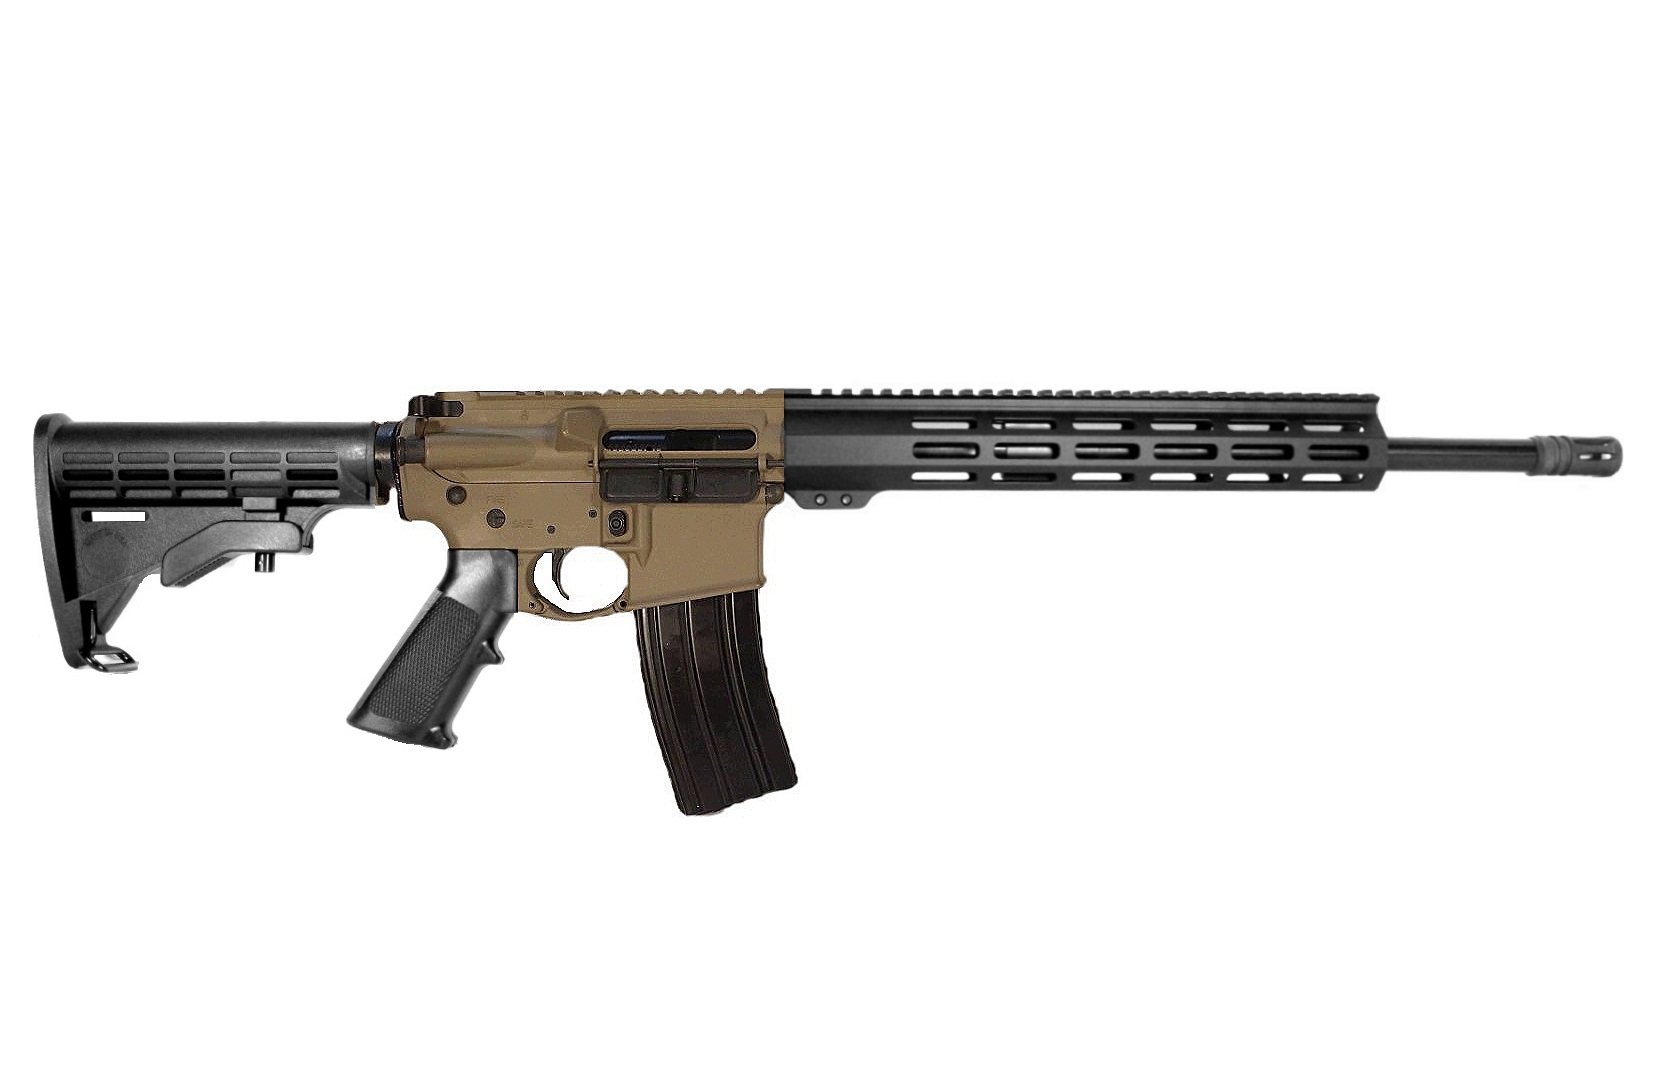 We now have AR Rifles/Pistols in Two Tone Colors!